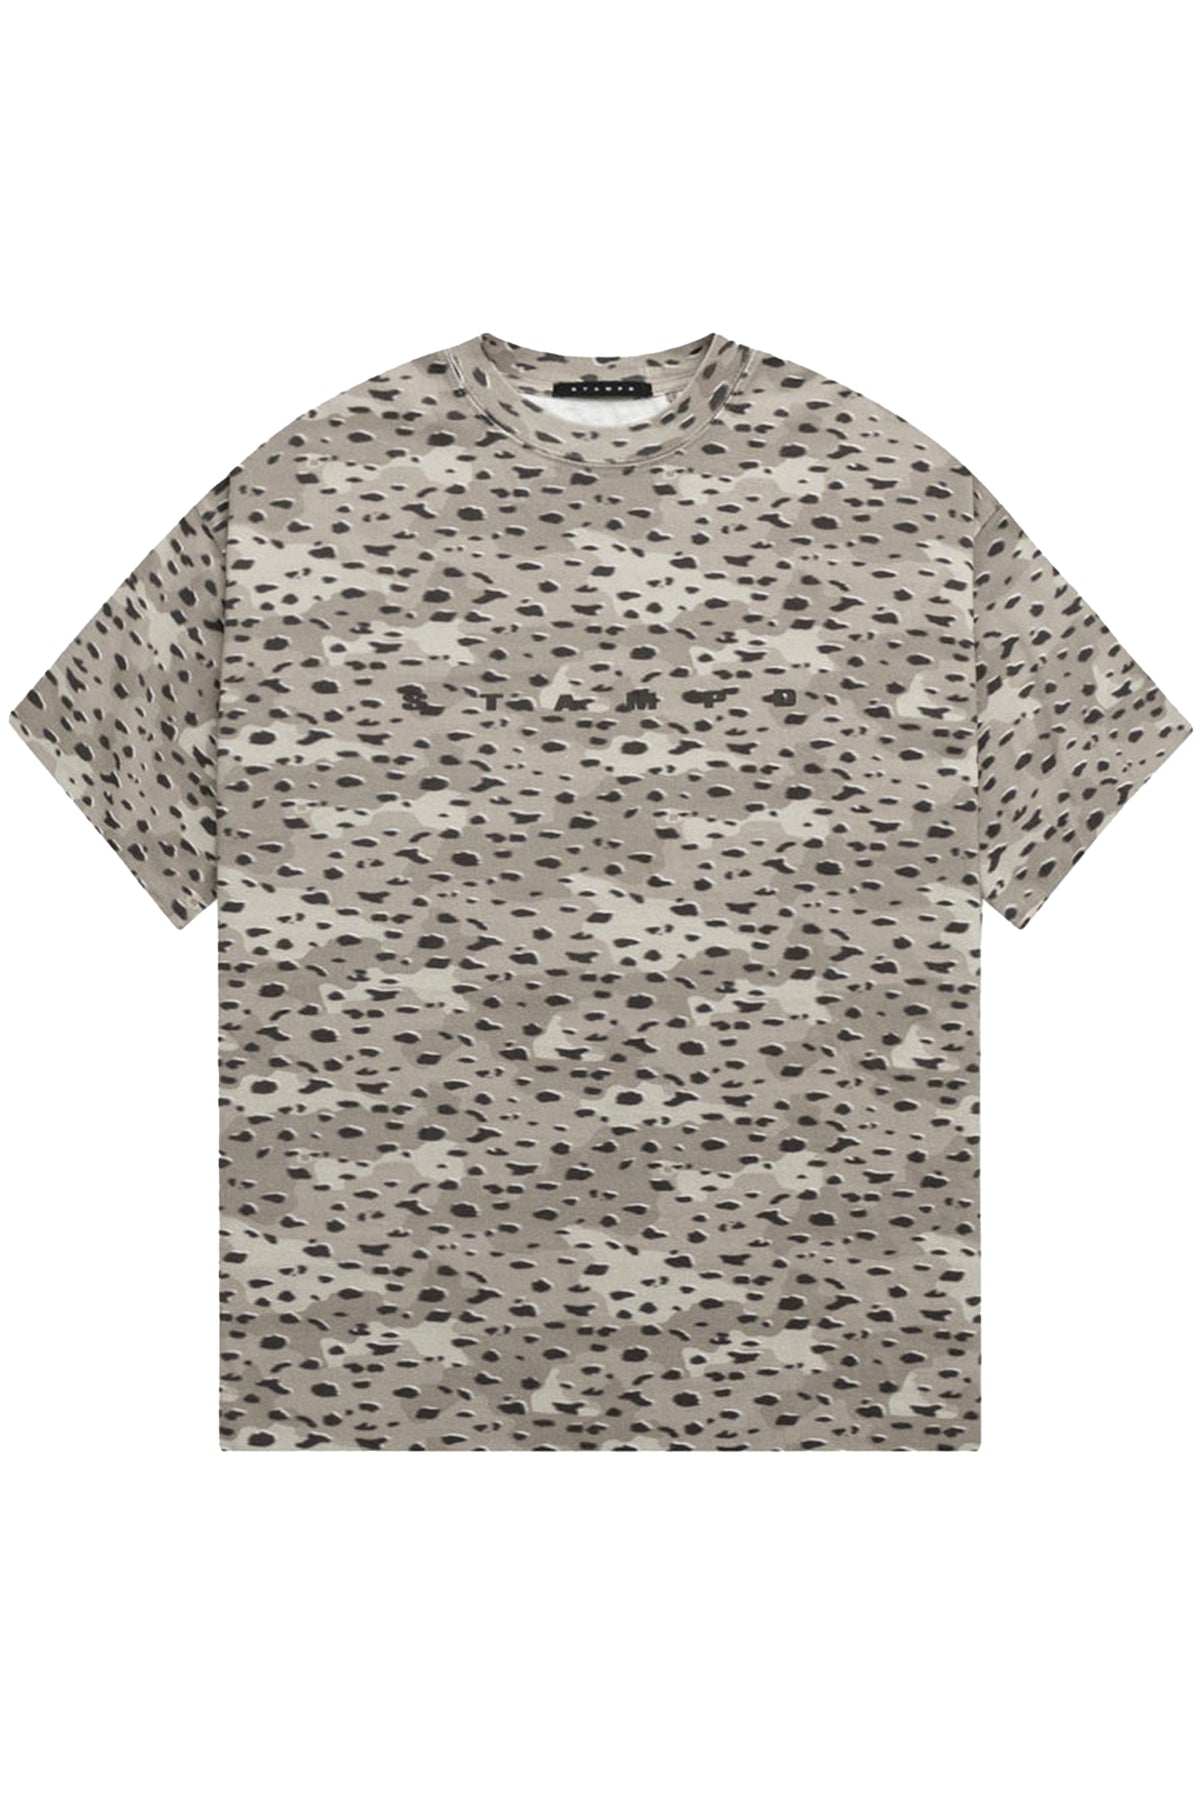 STAMPD CAMO LEOPARD RELAXED TEE / CAMO LEOPARD